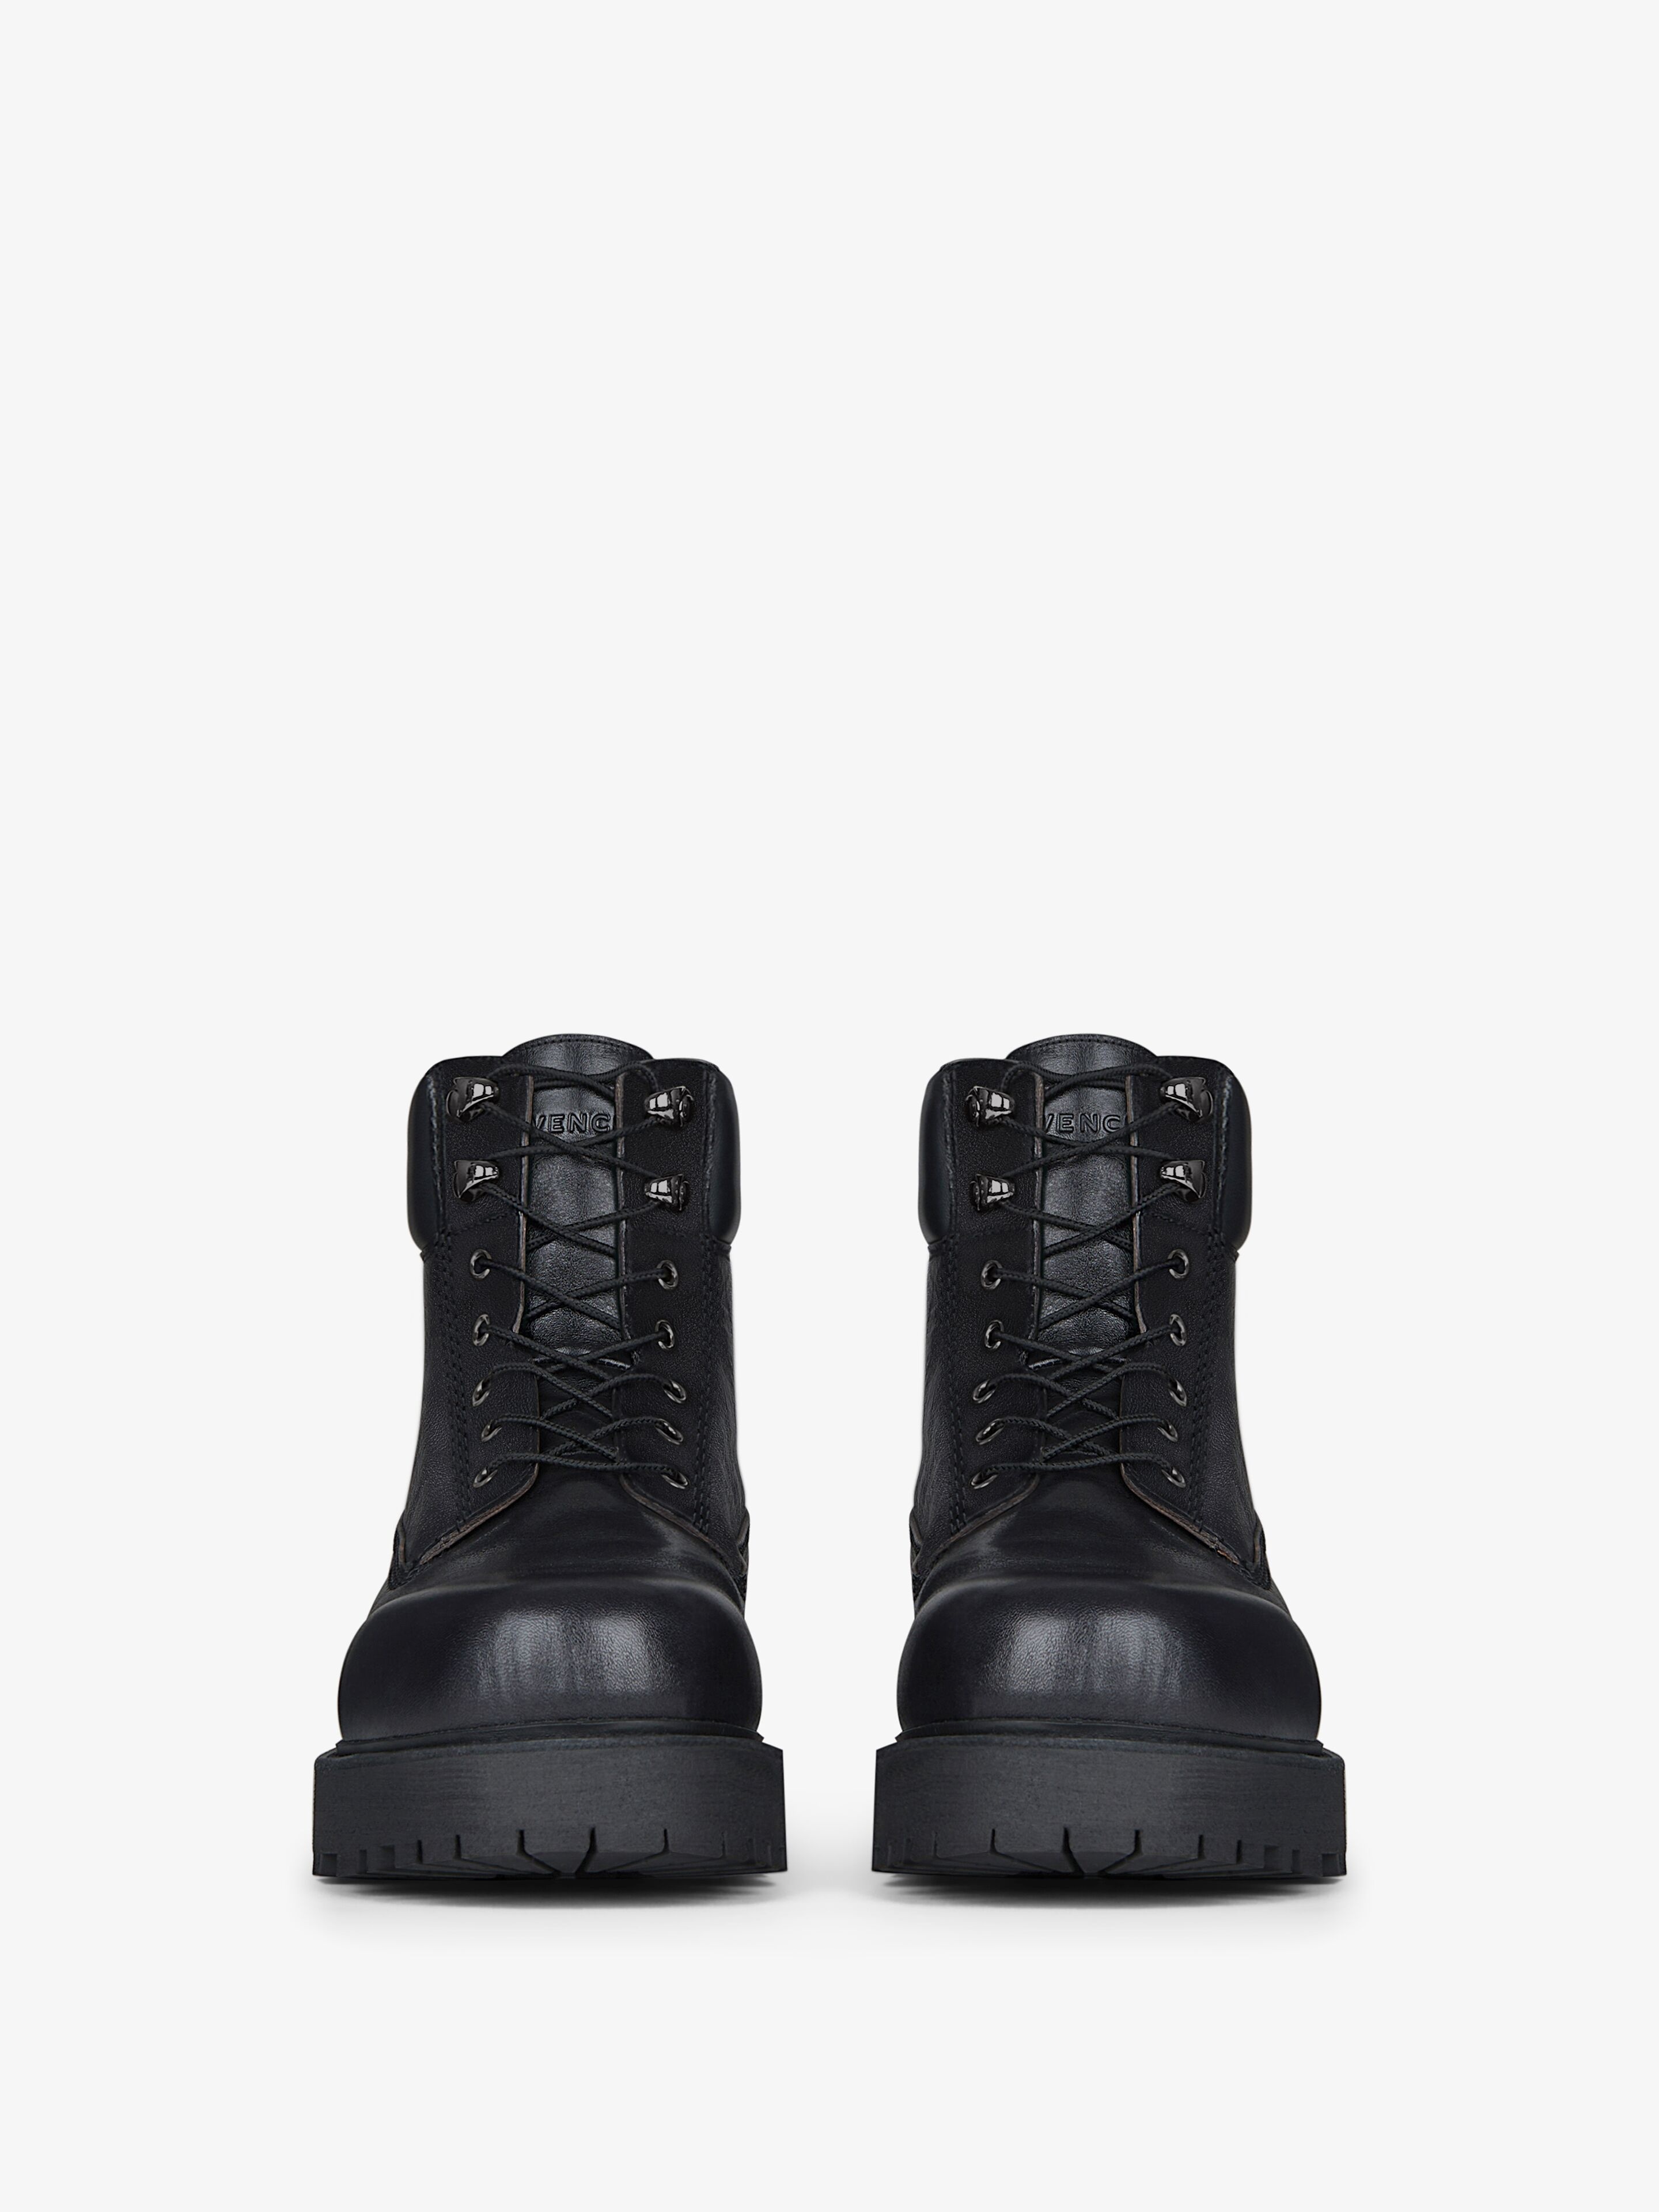 Givenchy Squared Ankle Boot in Black